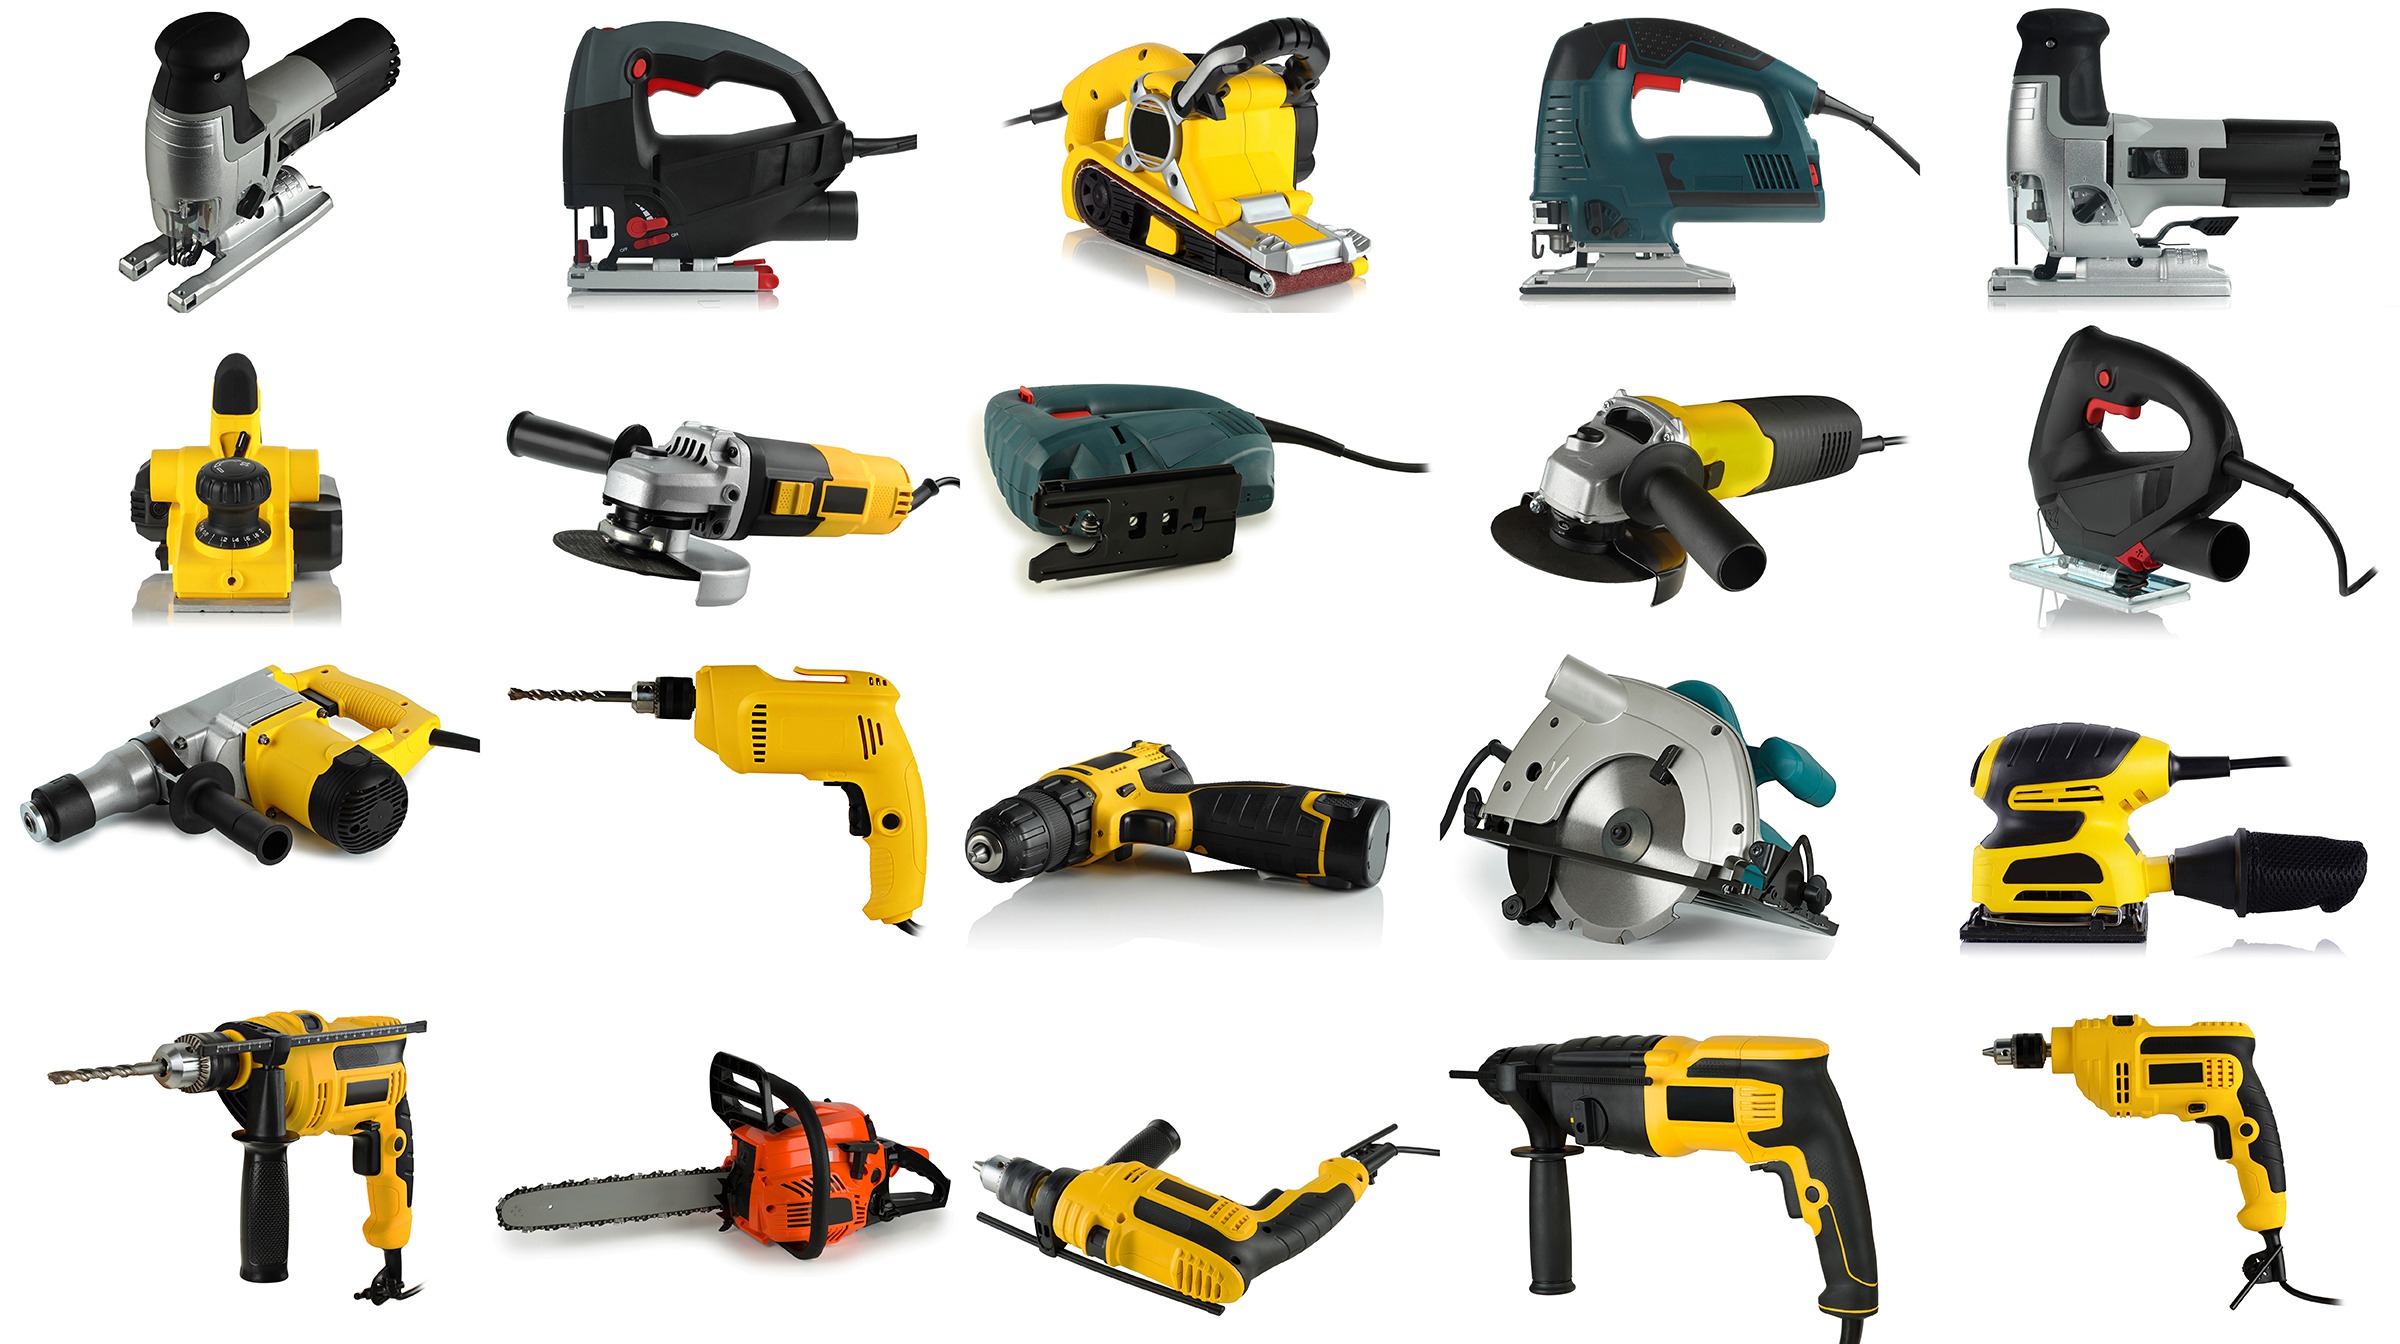 set of images of power tools